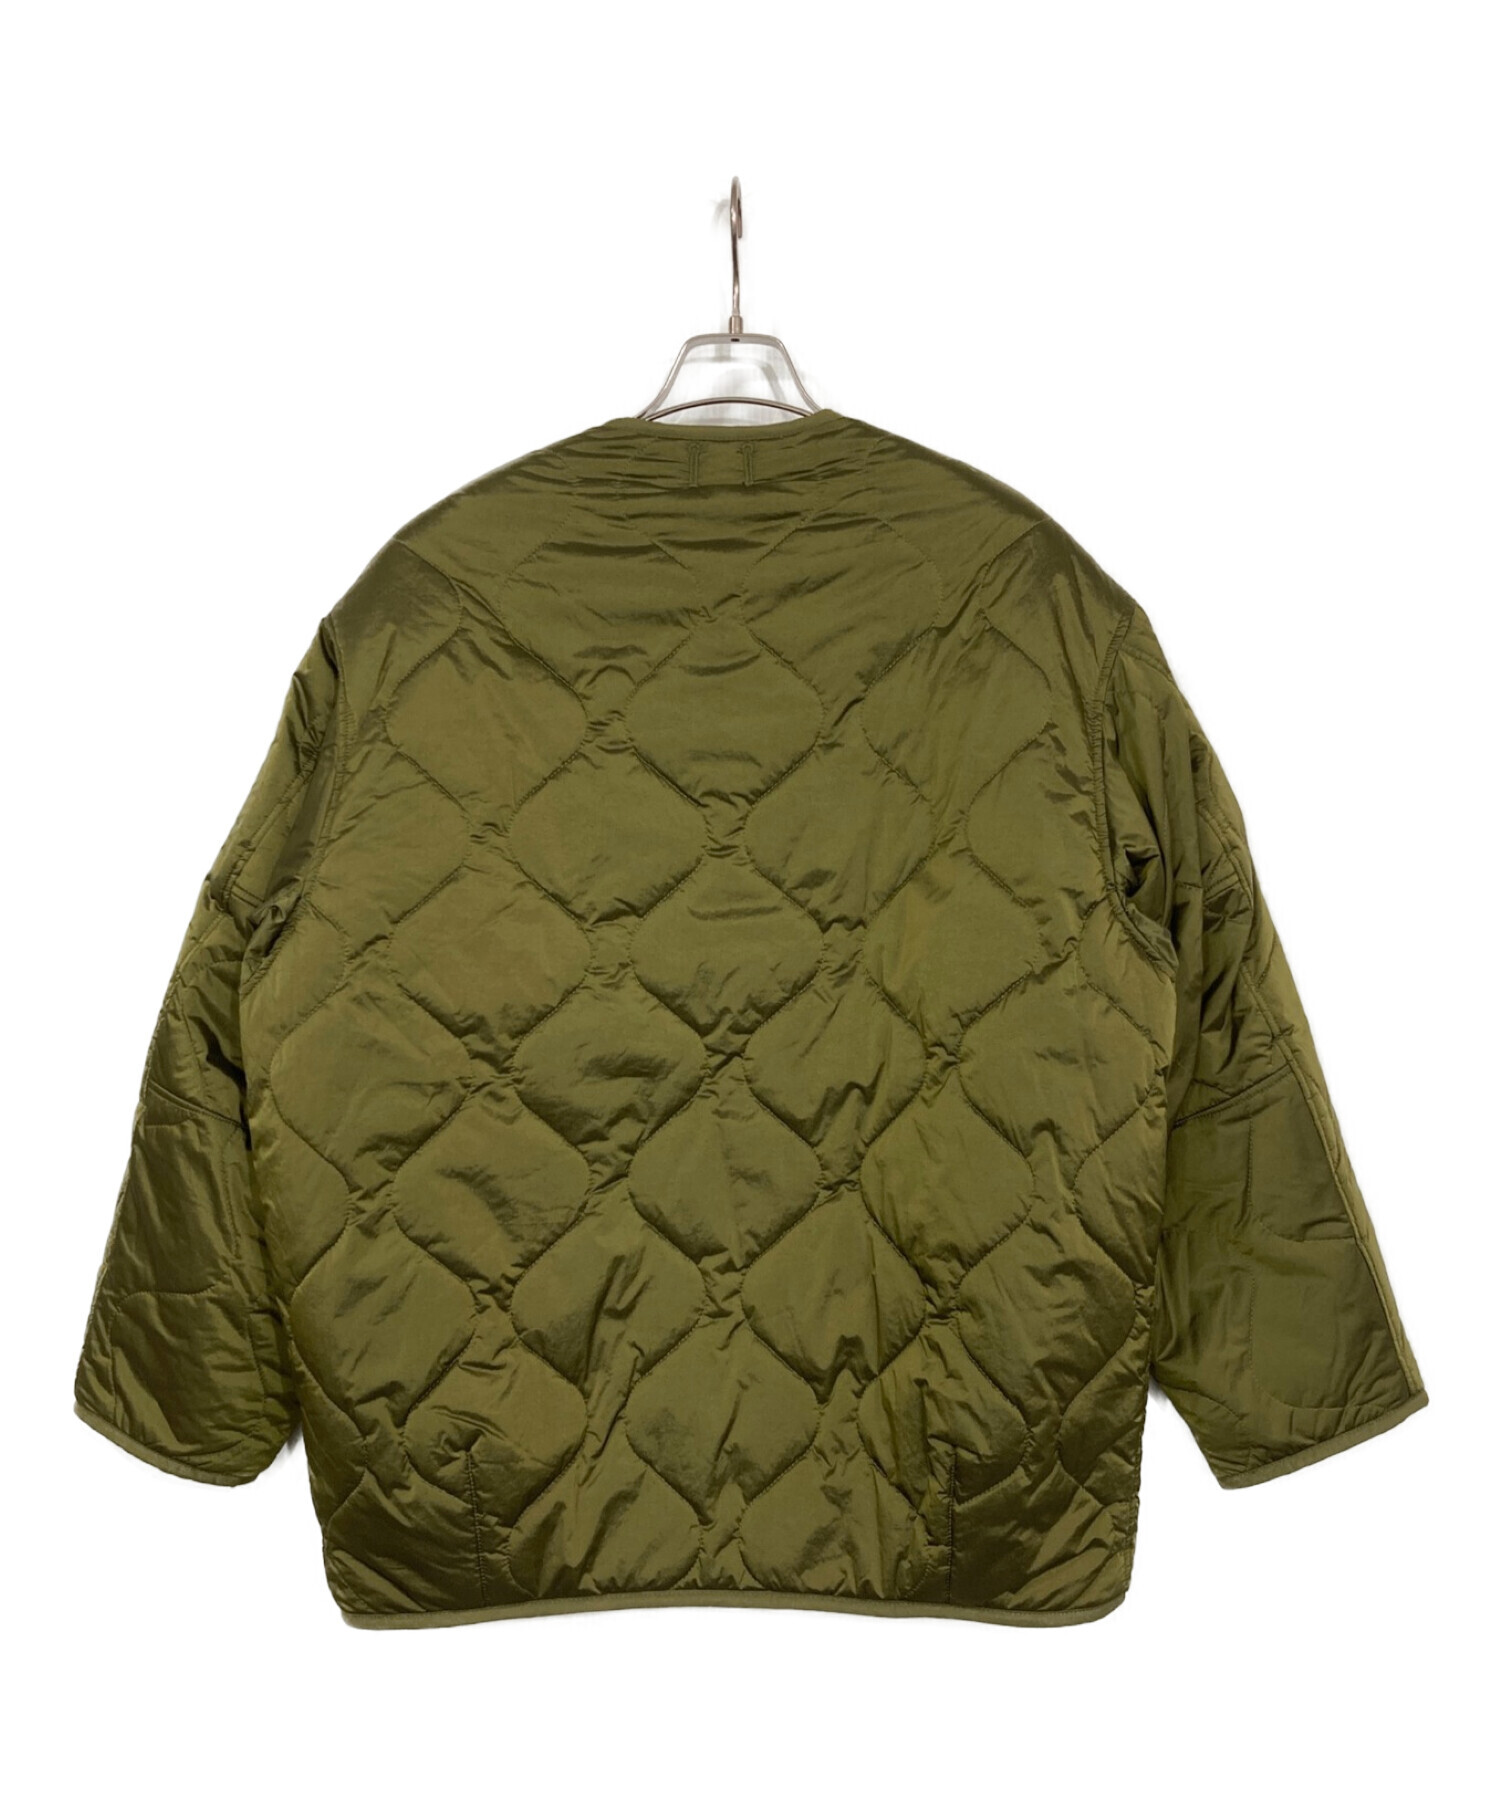 moussy (マウジー) RIVER QUILTED COCOON ジャケット オリーブ サイズ:SIZE FREE 未使用品